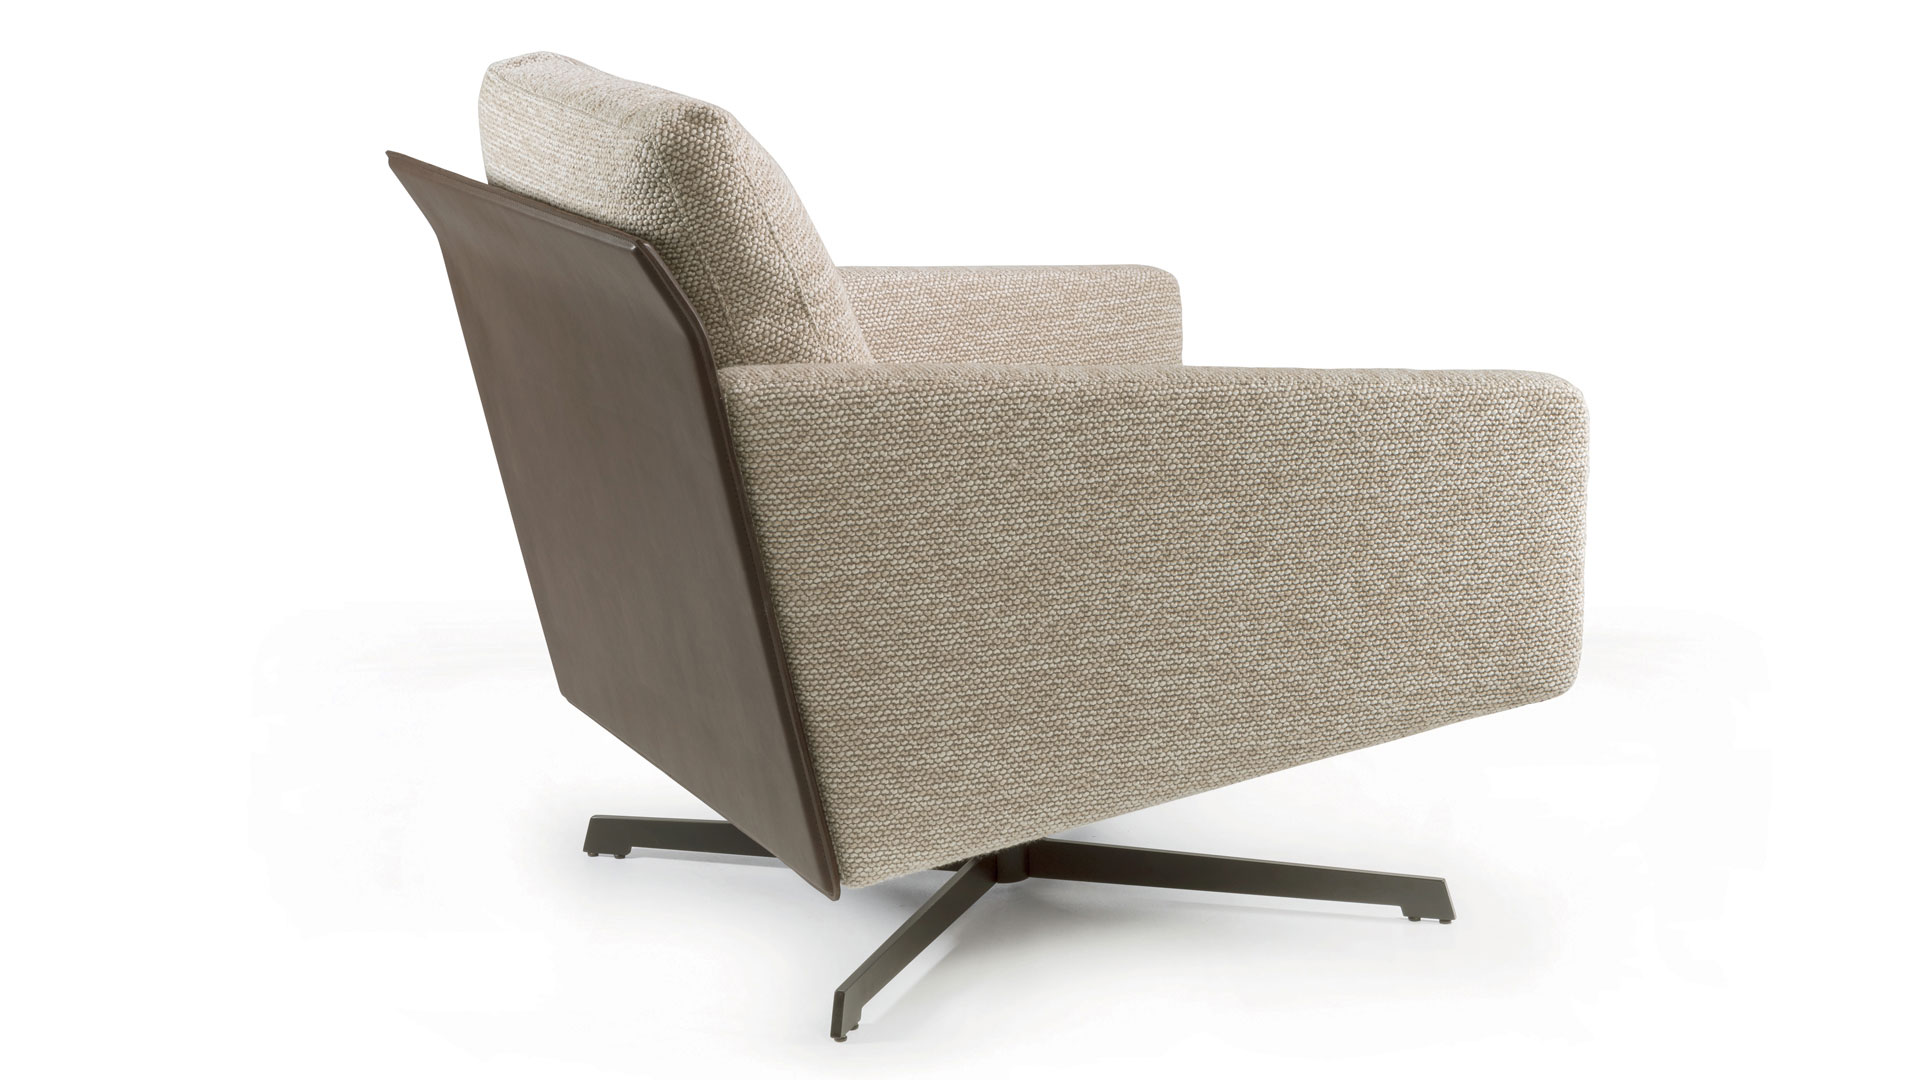 The Cantori armchairs: between authenticity and creativity - Cantori